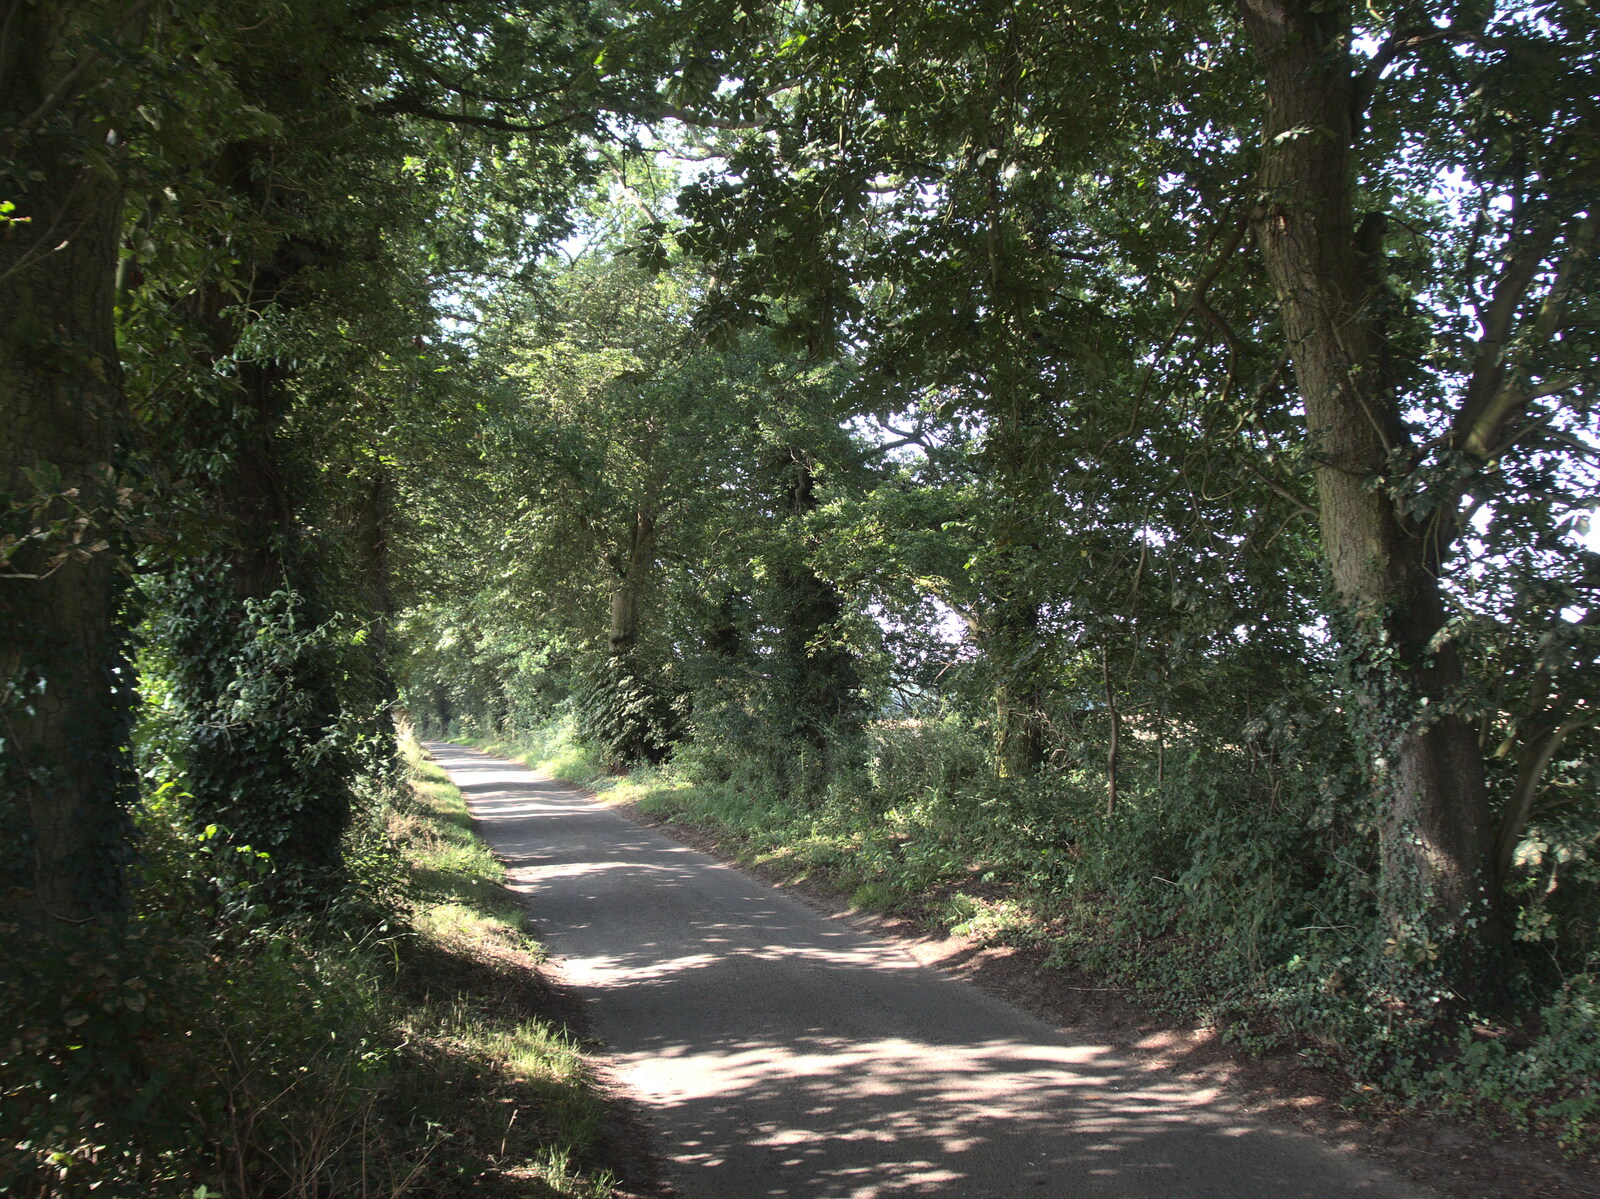 The leaves are starting to turn on Thornham Road from The BSCC at The Crown, Gissing, Norfolk - 22nd July 2021